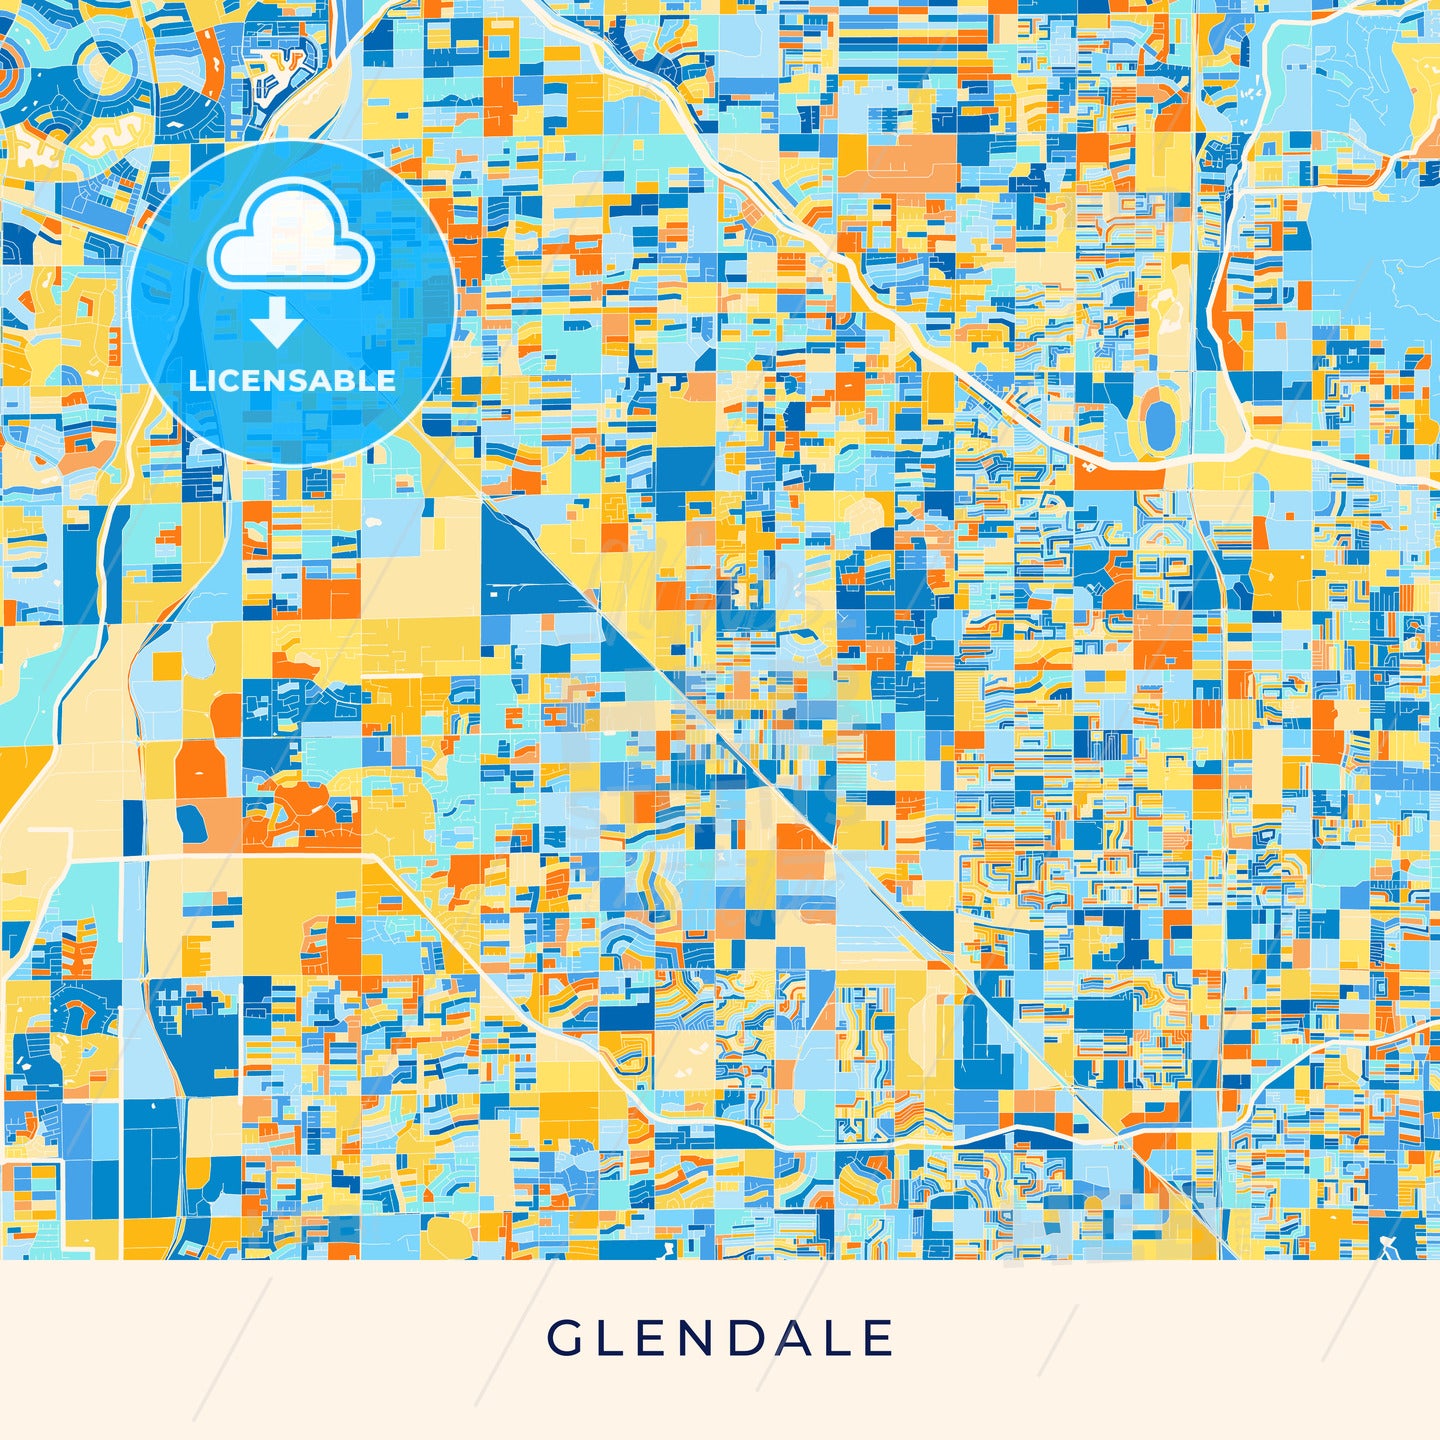 Glendale colorful map poster template